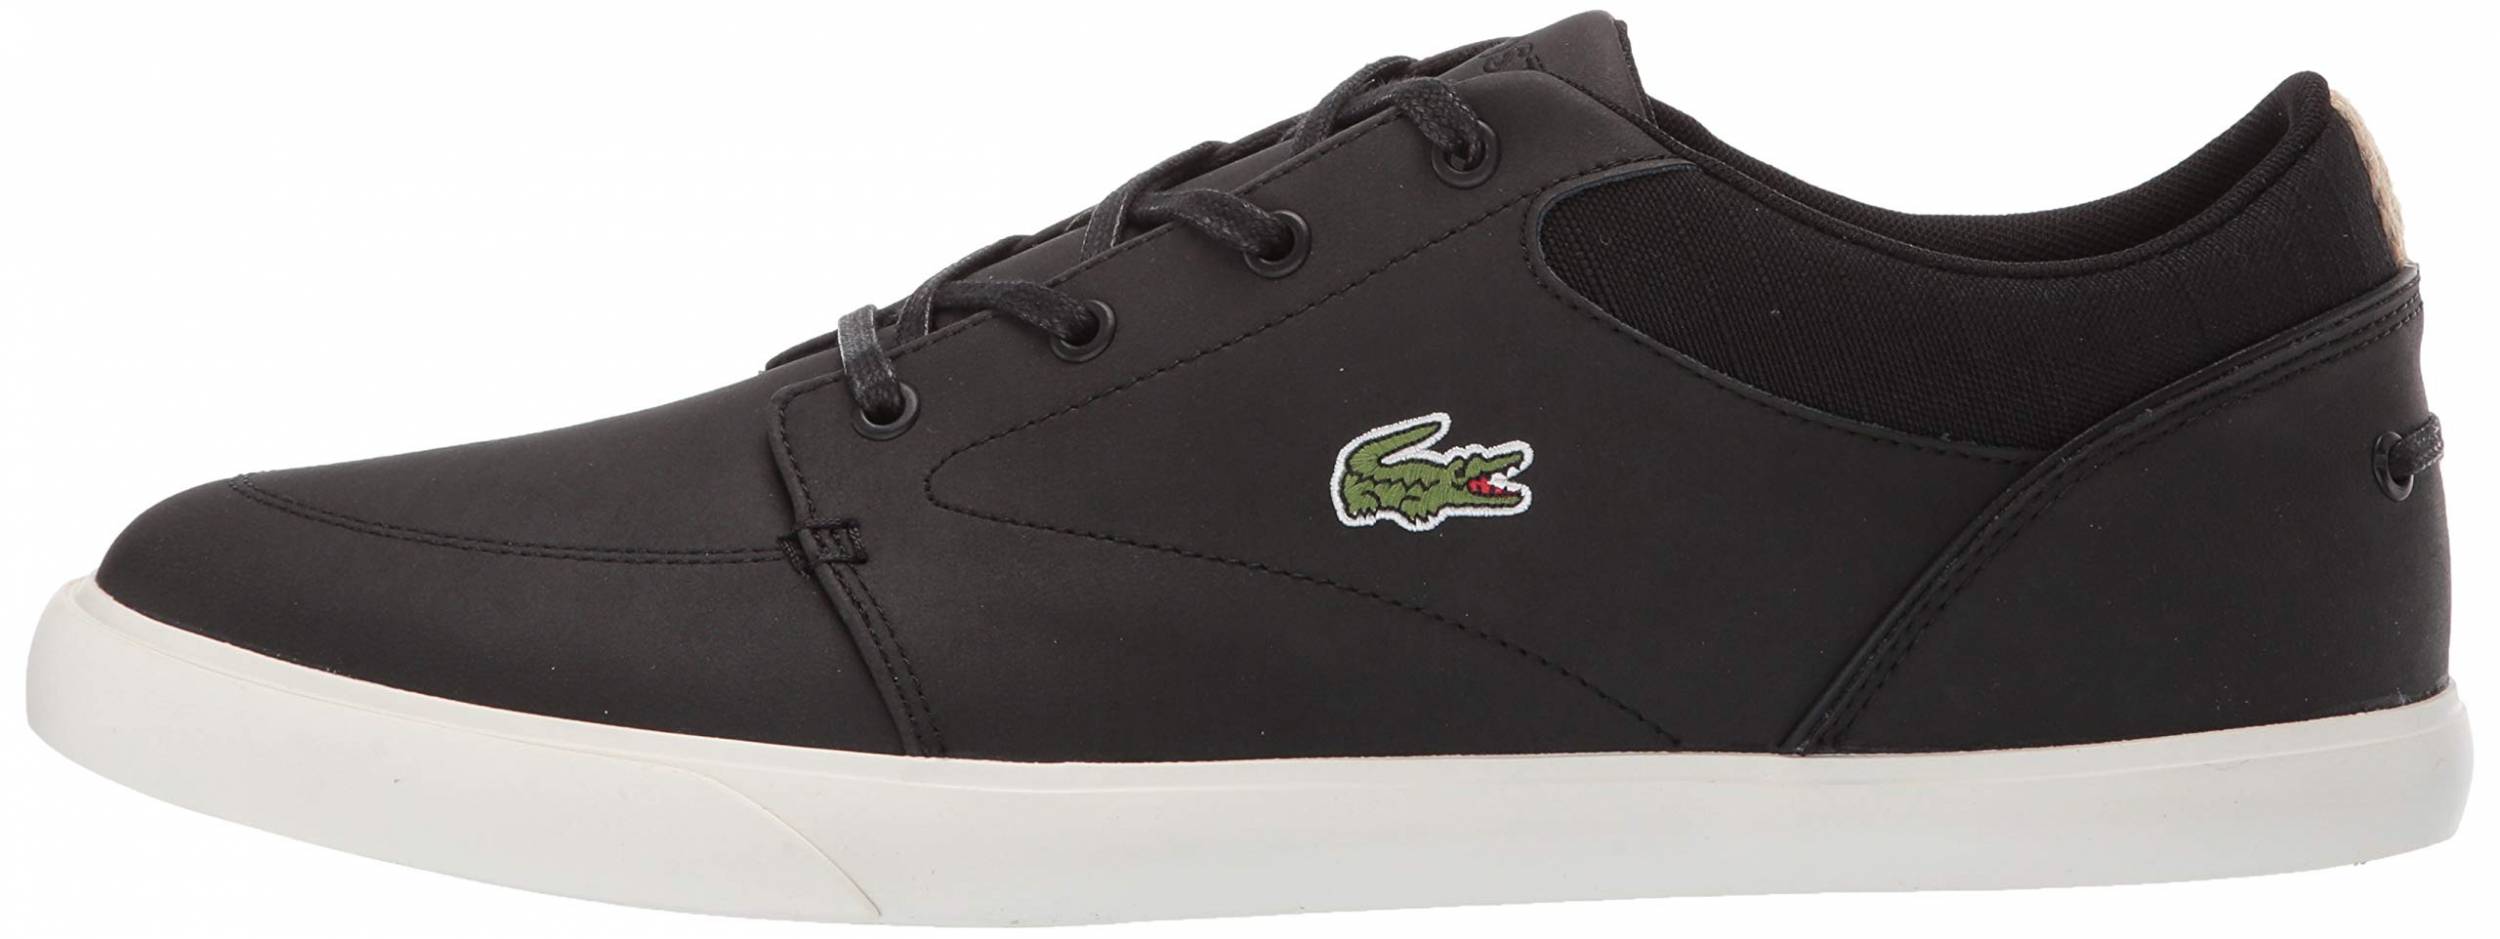 lacoste black leather sneakers